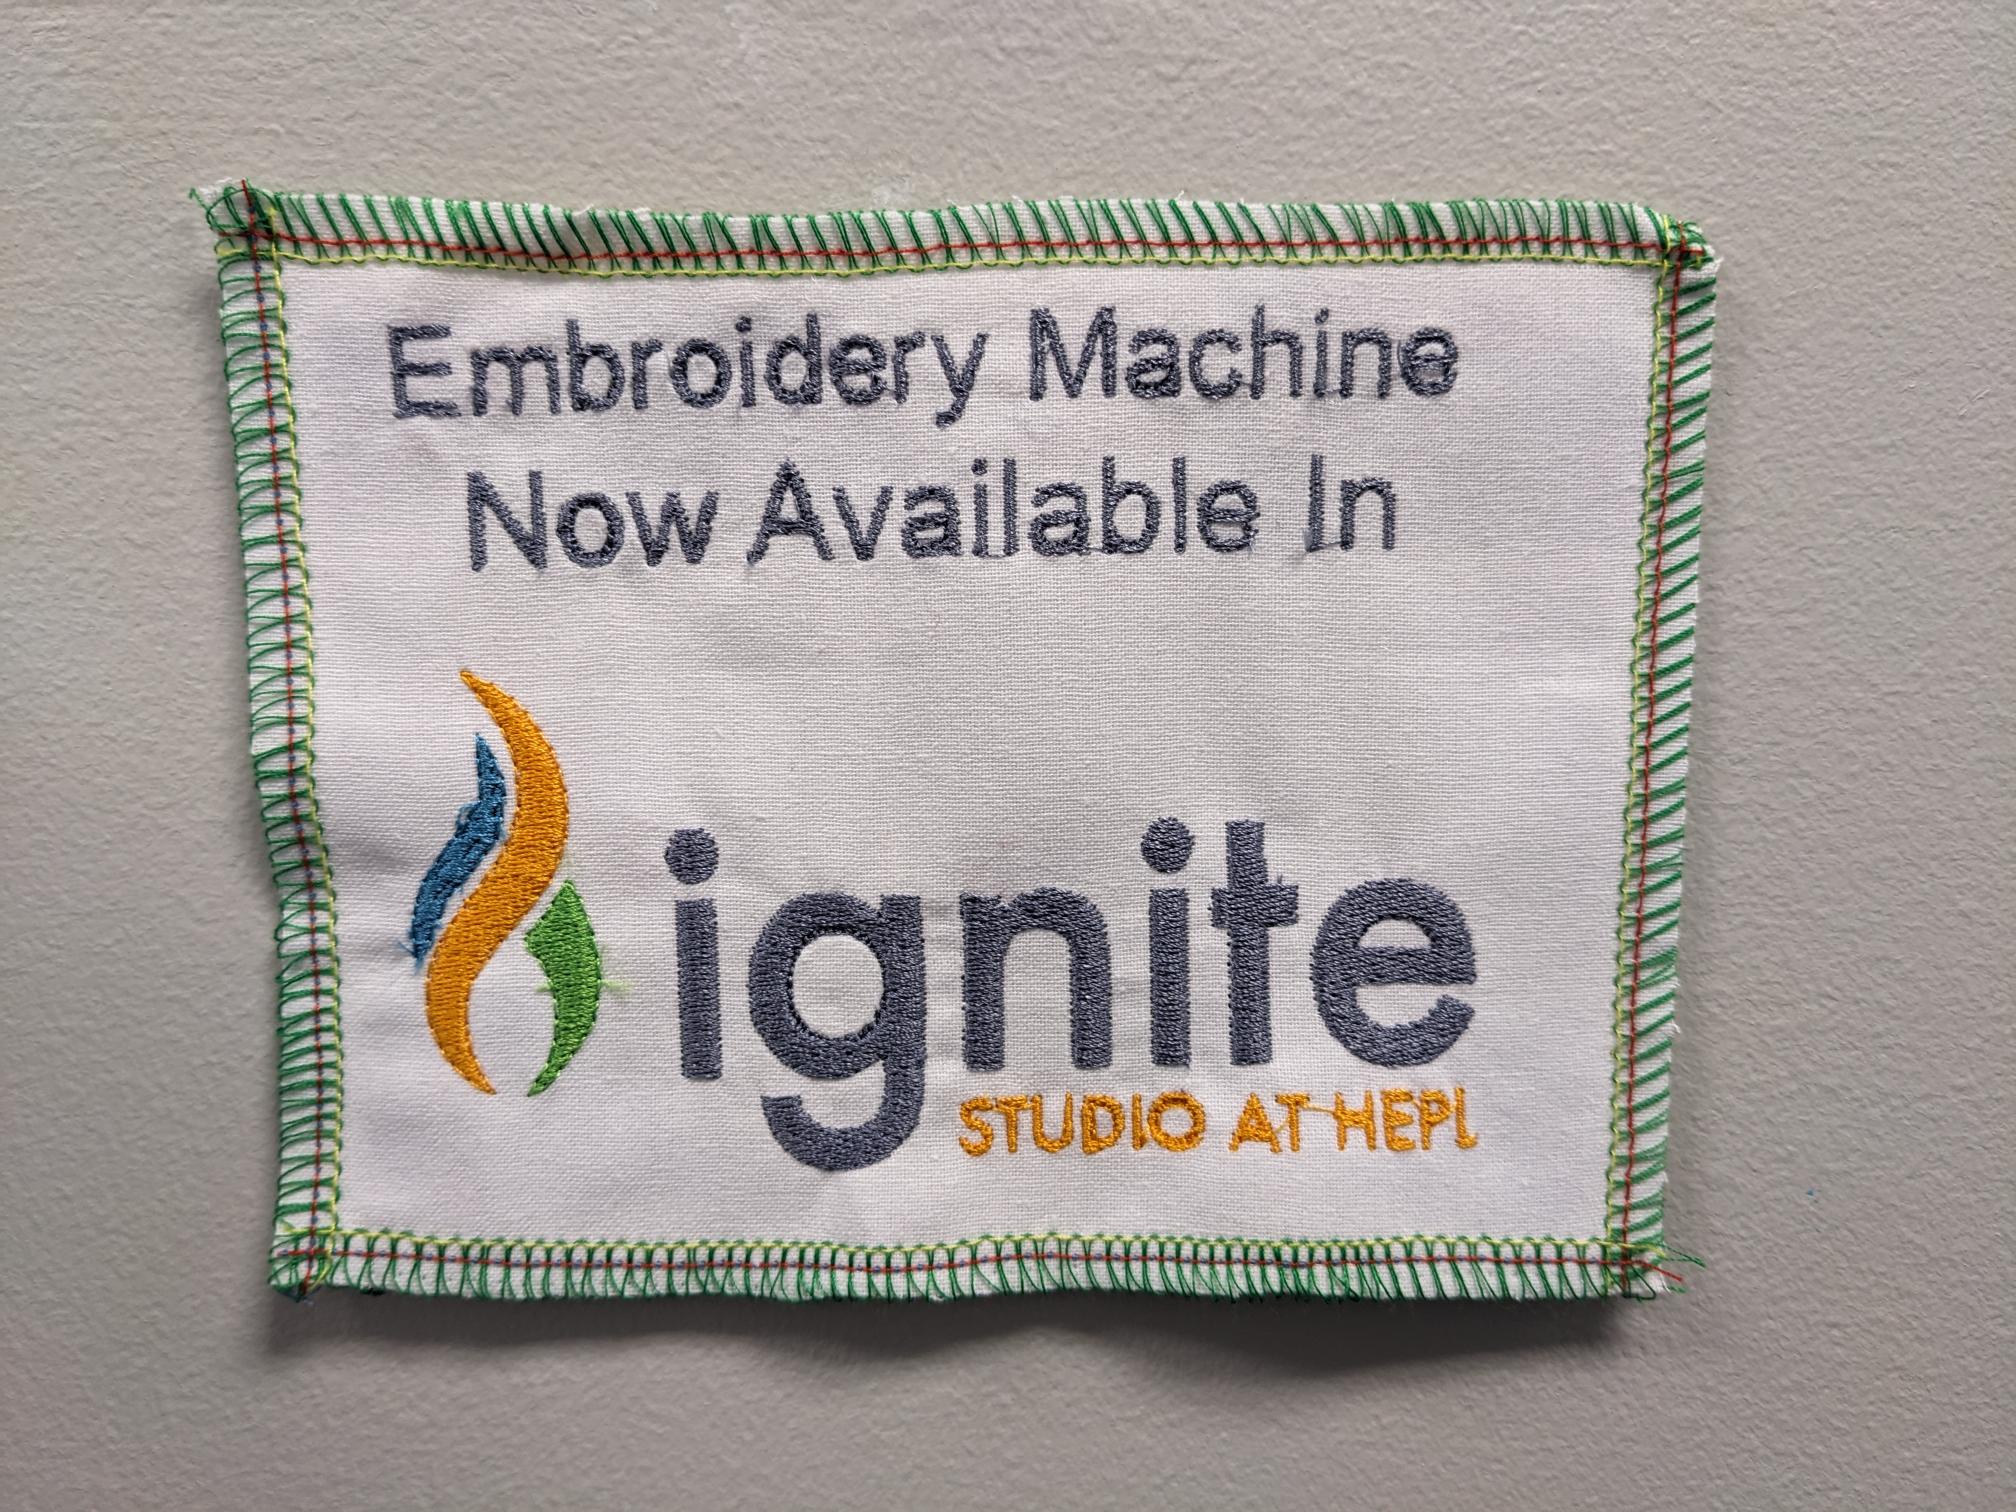 An embroidered design that reads "Embroidery Machine Now Available in Ignite Studio at HEPL" with the Ignite flame logo.